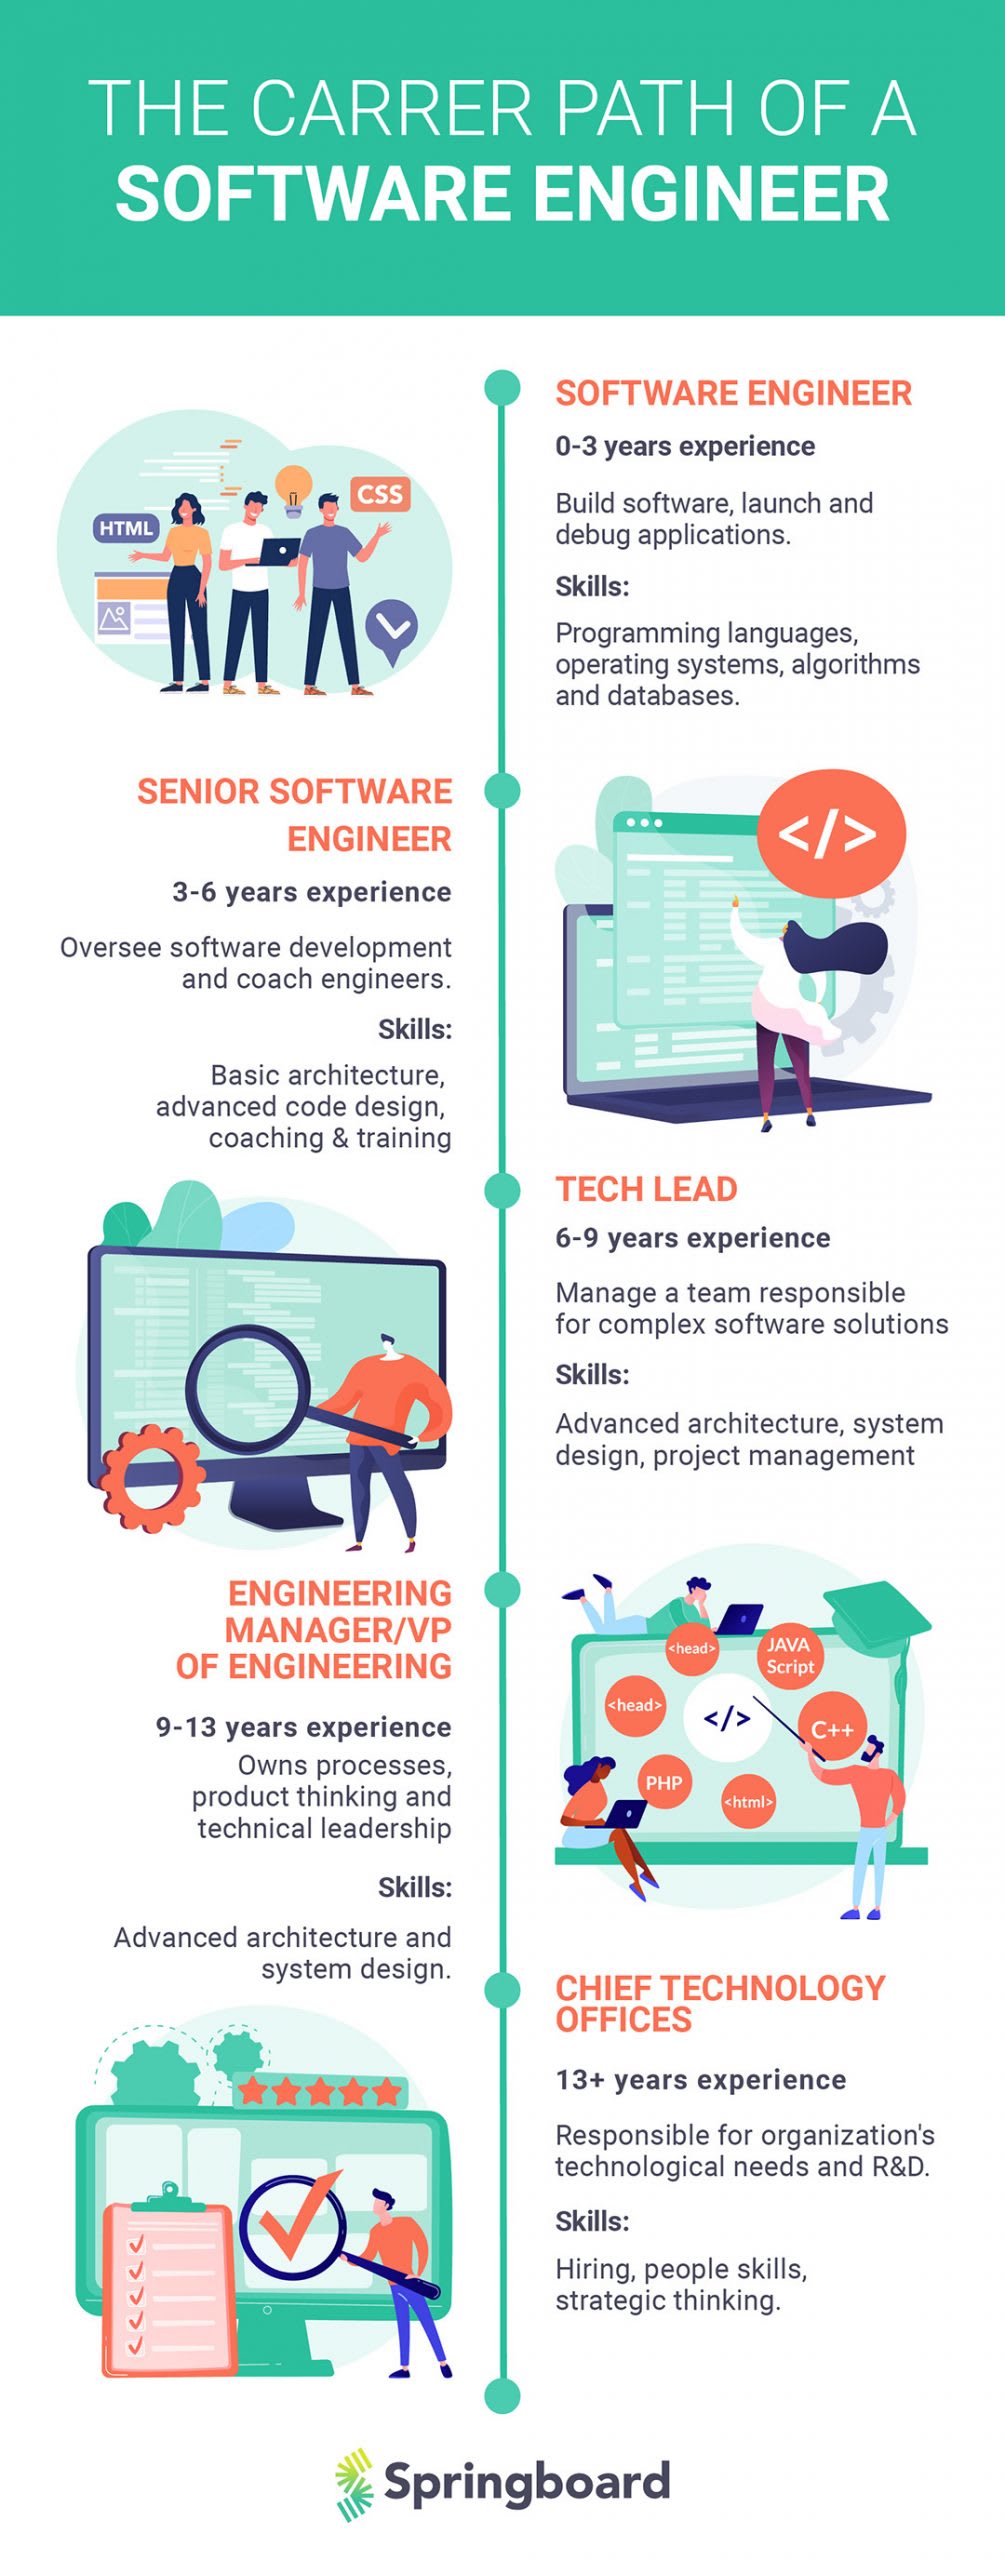 The Career Path of a Software Engineer How to Get a Promotion